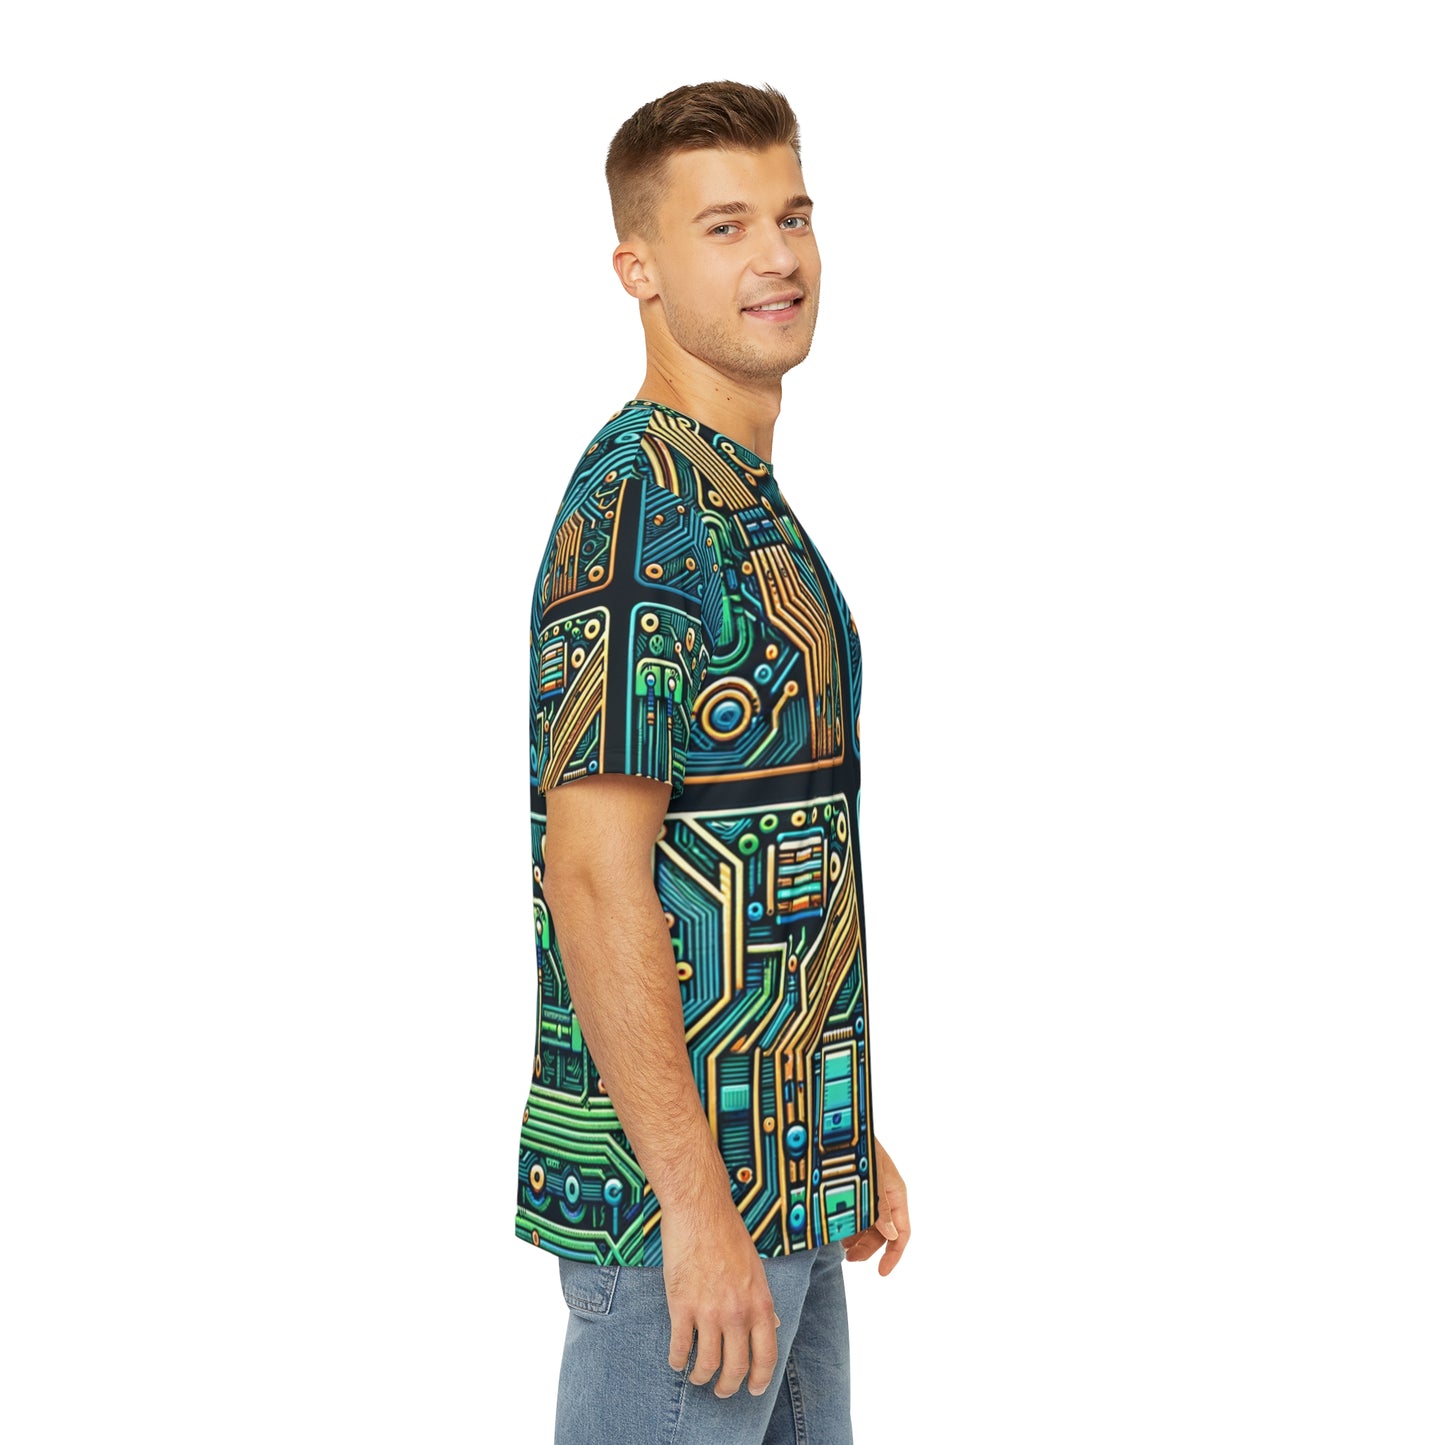 Side view of the Circuit Synapse Array Crewneck Pullover All-Over Print Short-Sleeved Shirt blue green yellow black white circuit pattern paired with casual denim pants worn by a white man